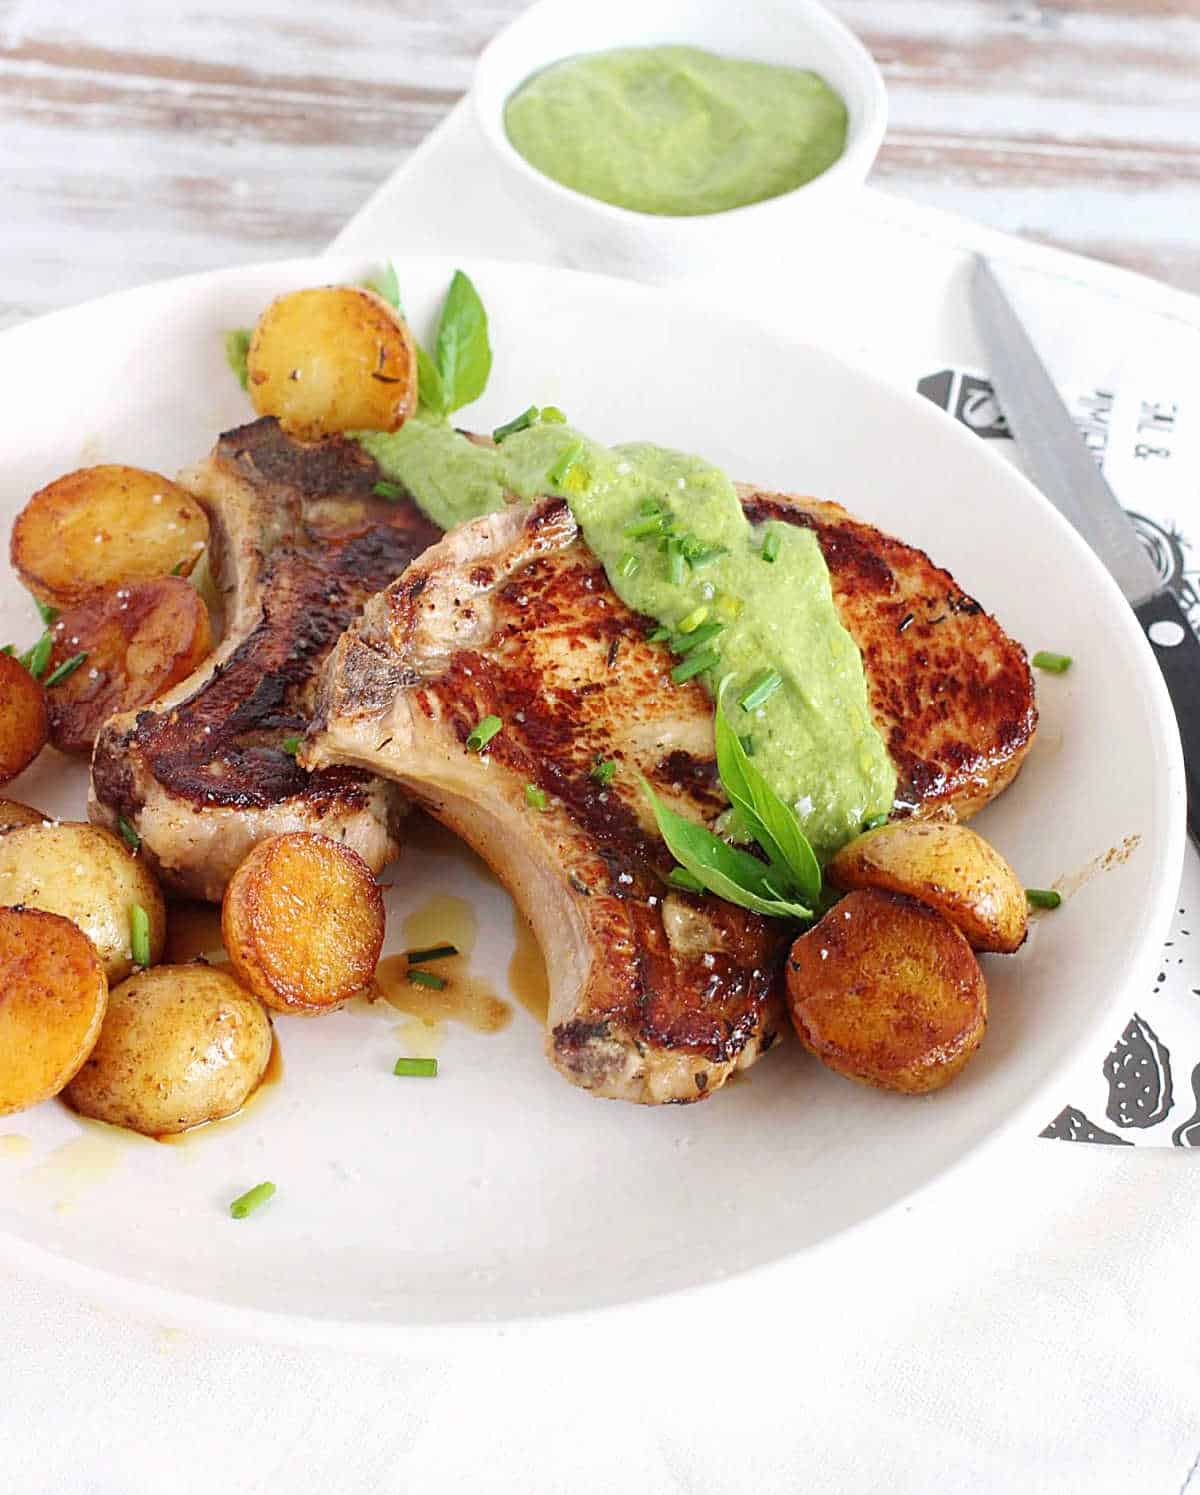 Two pork chops with salsa verde and roasted potatoes on a white plate. Bowl with salsa, whitish surface, a knife.